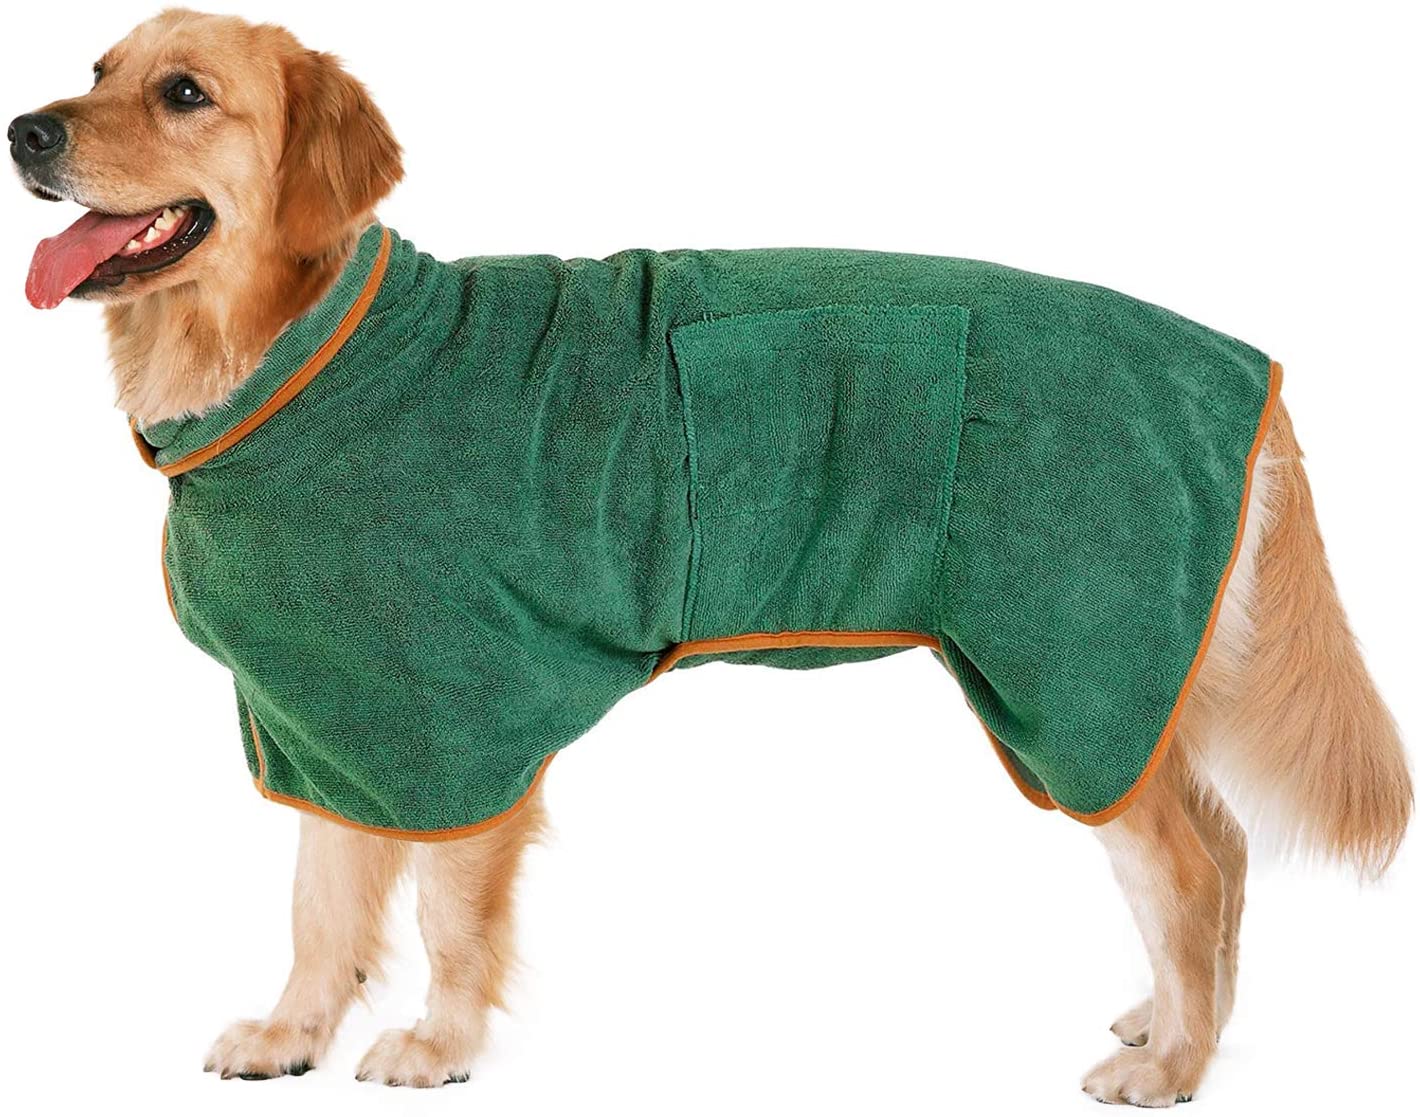 (🔥HOT SALE) Super Absorbent Pet Bathrobe, Buy 2 Save 10% OFF & Free Shipping